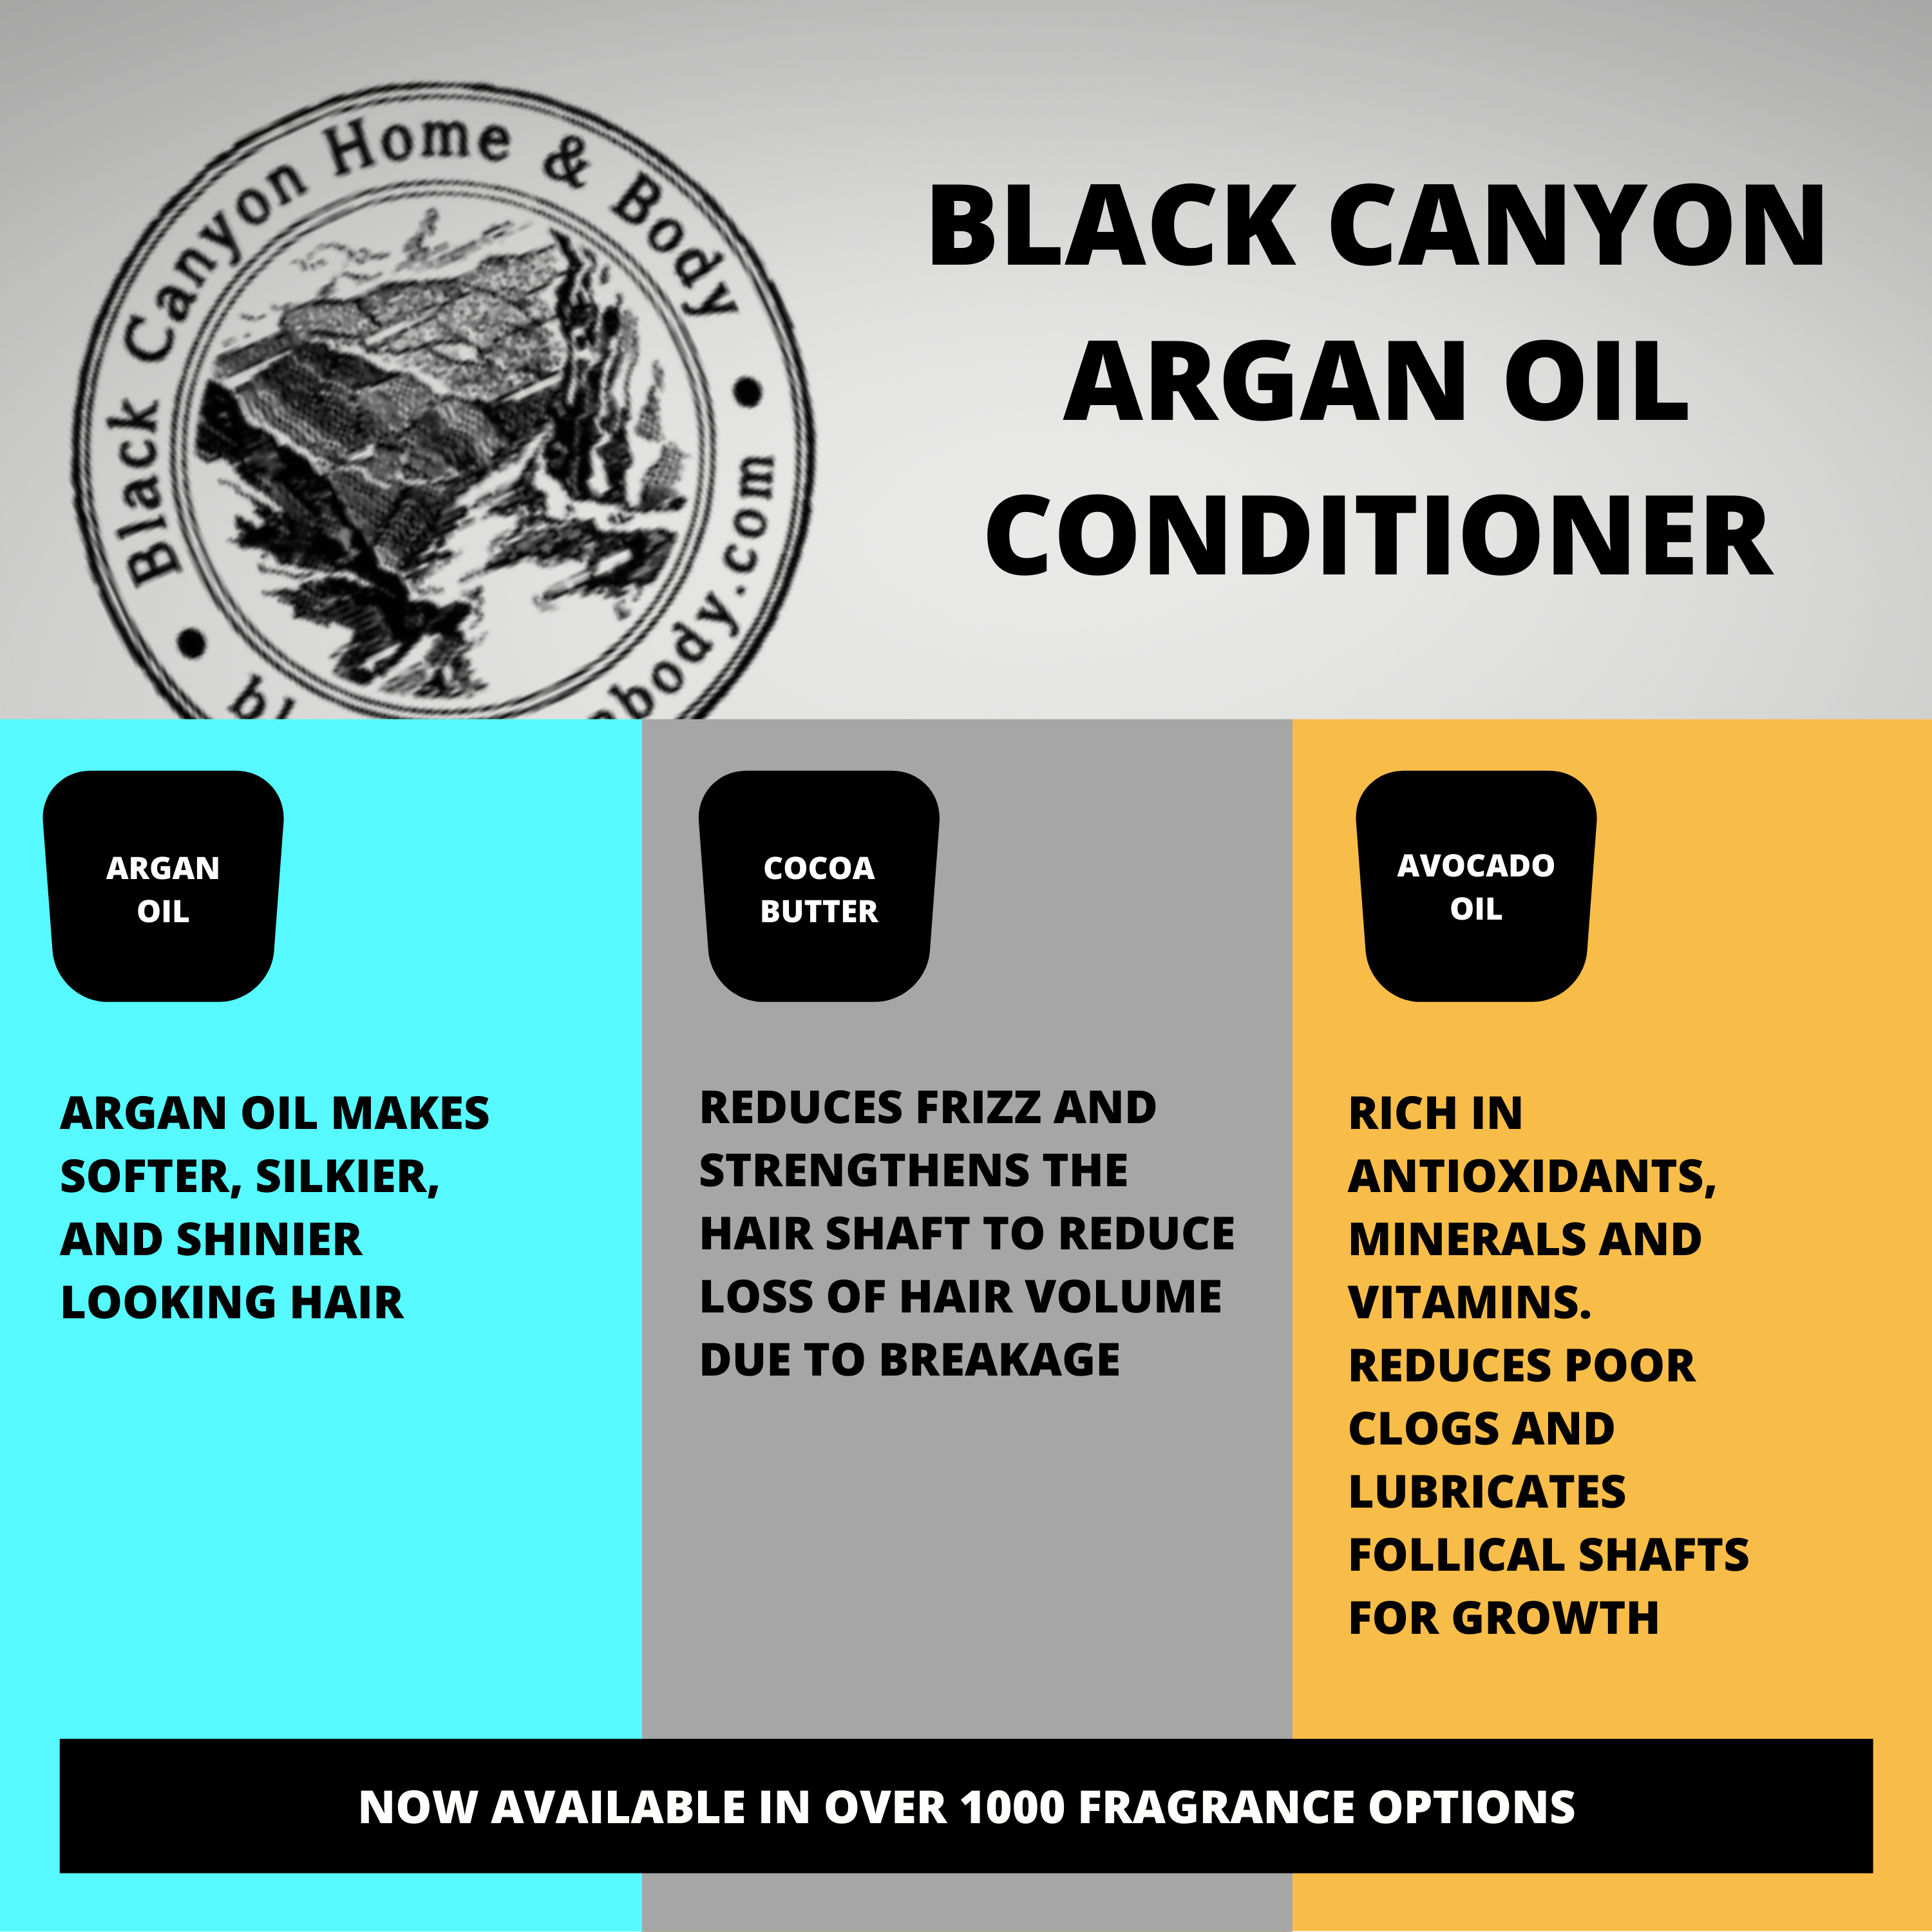 Black Canyon Lemon & Hyacinth Scented Conditioner with Argan Oil